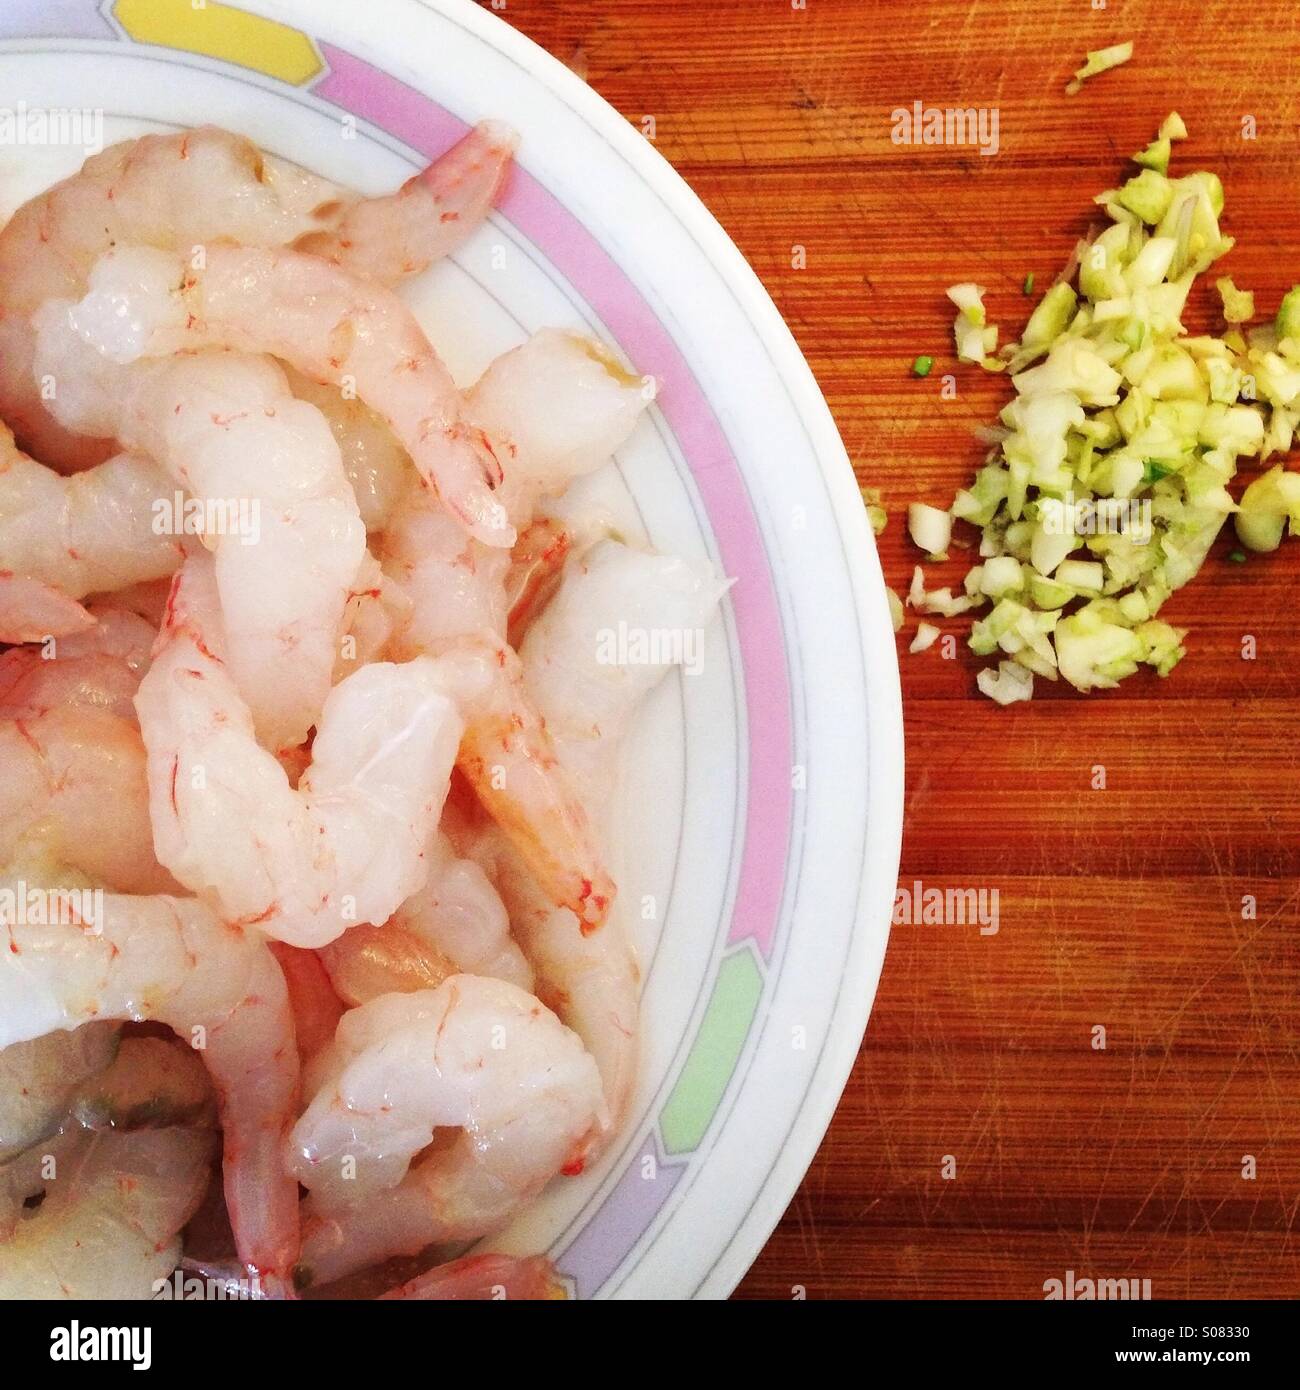 Prawns tails at plate with sliced garlic on wooden board Stock Photo